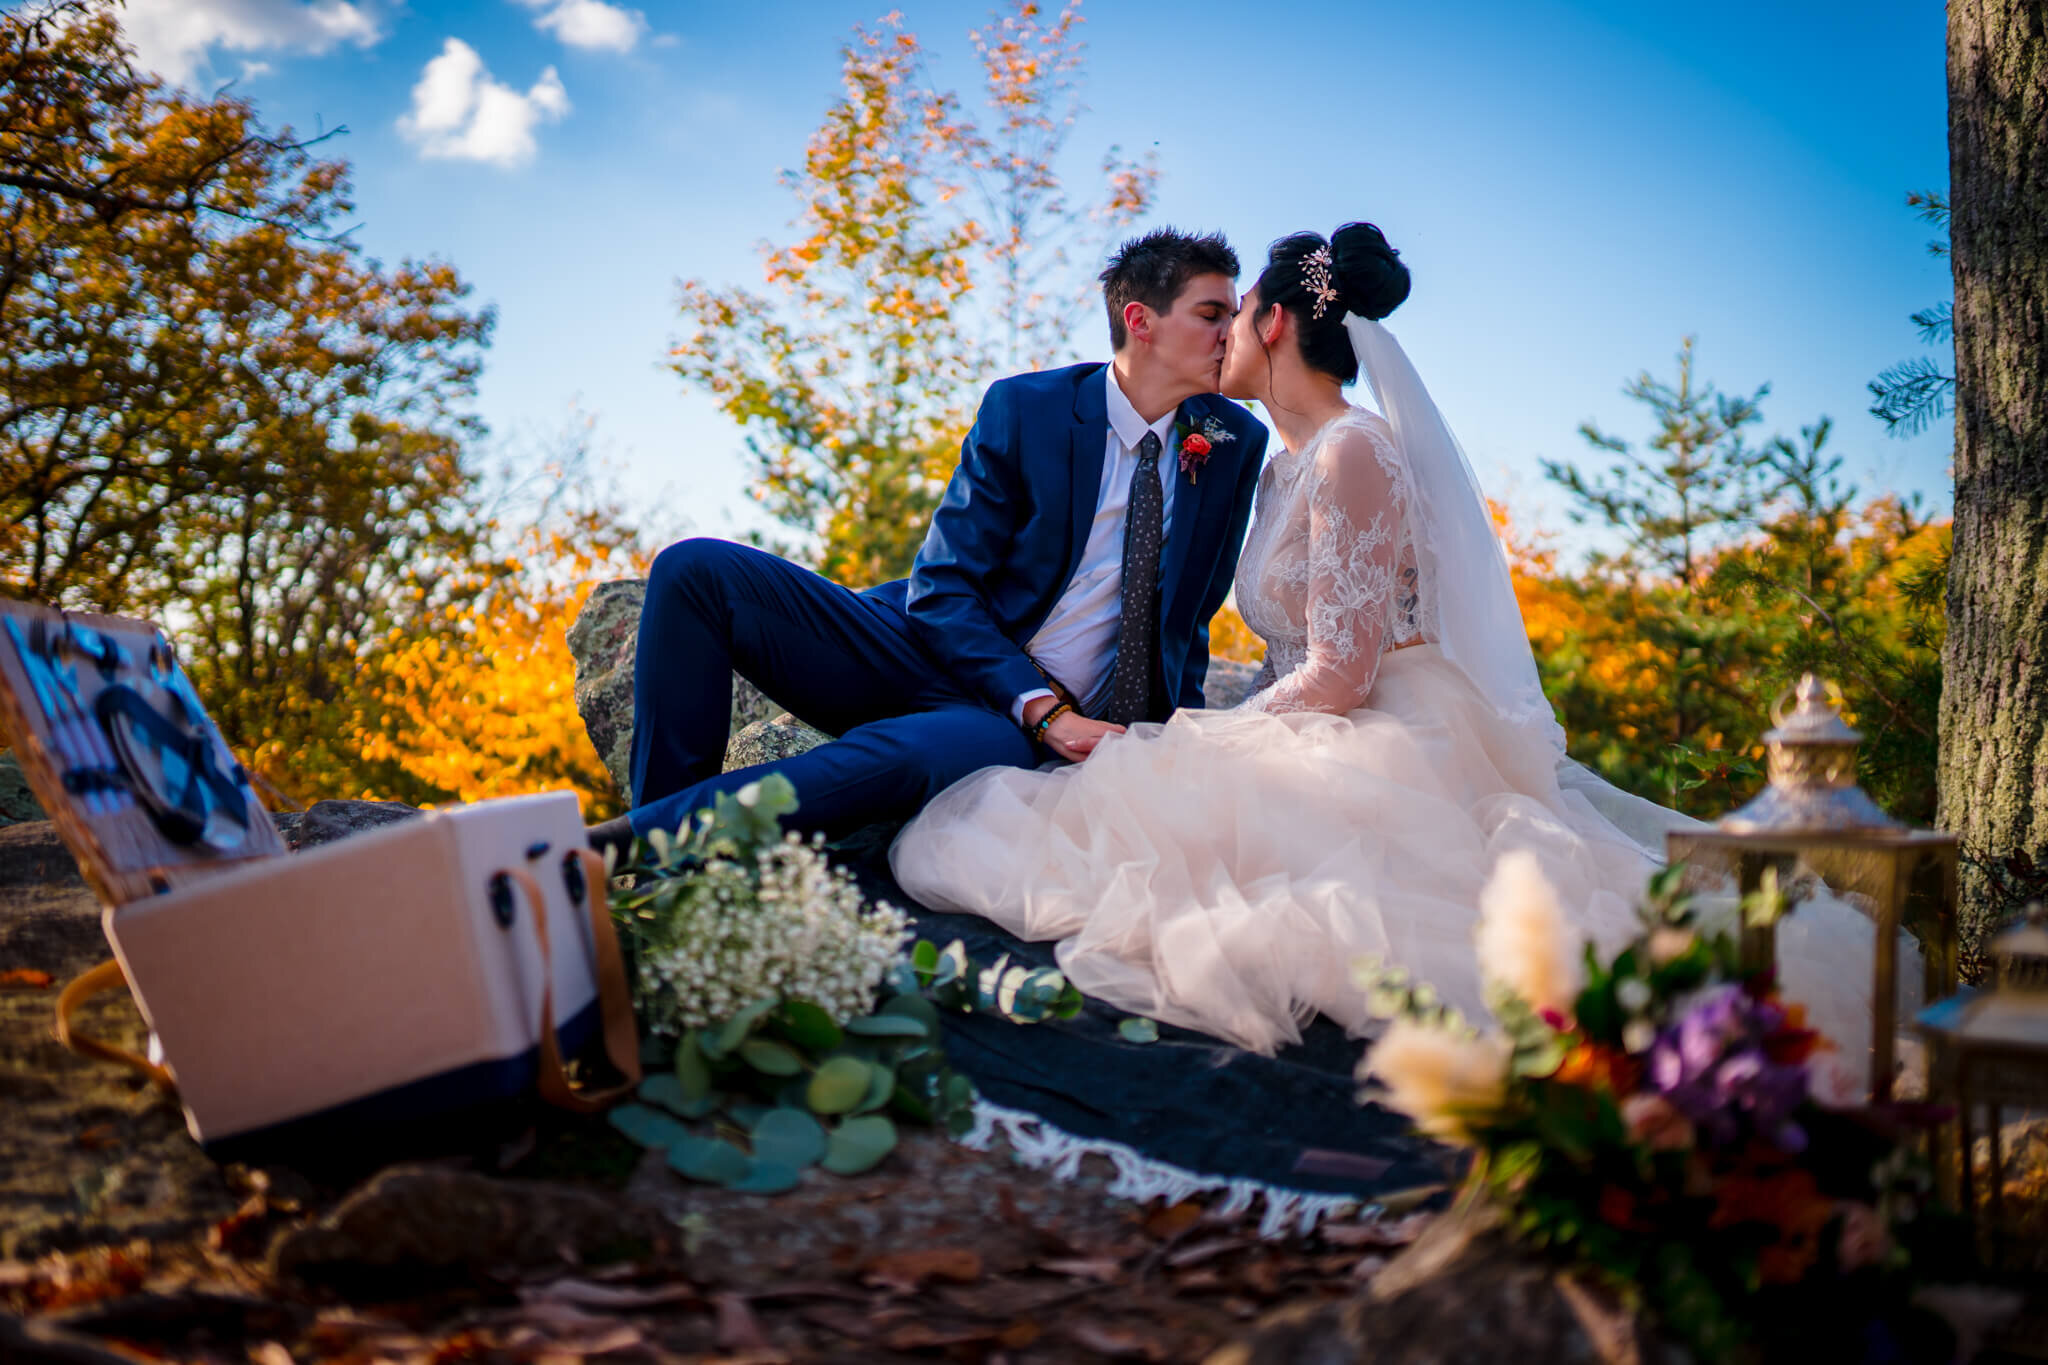 01-Ayla-Lee-Sugarloaf-Mountain-Elopement-Autumn-Wedding-Day-Picnic-Photography-by-Bee-Two-Sweet-48.jpg